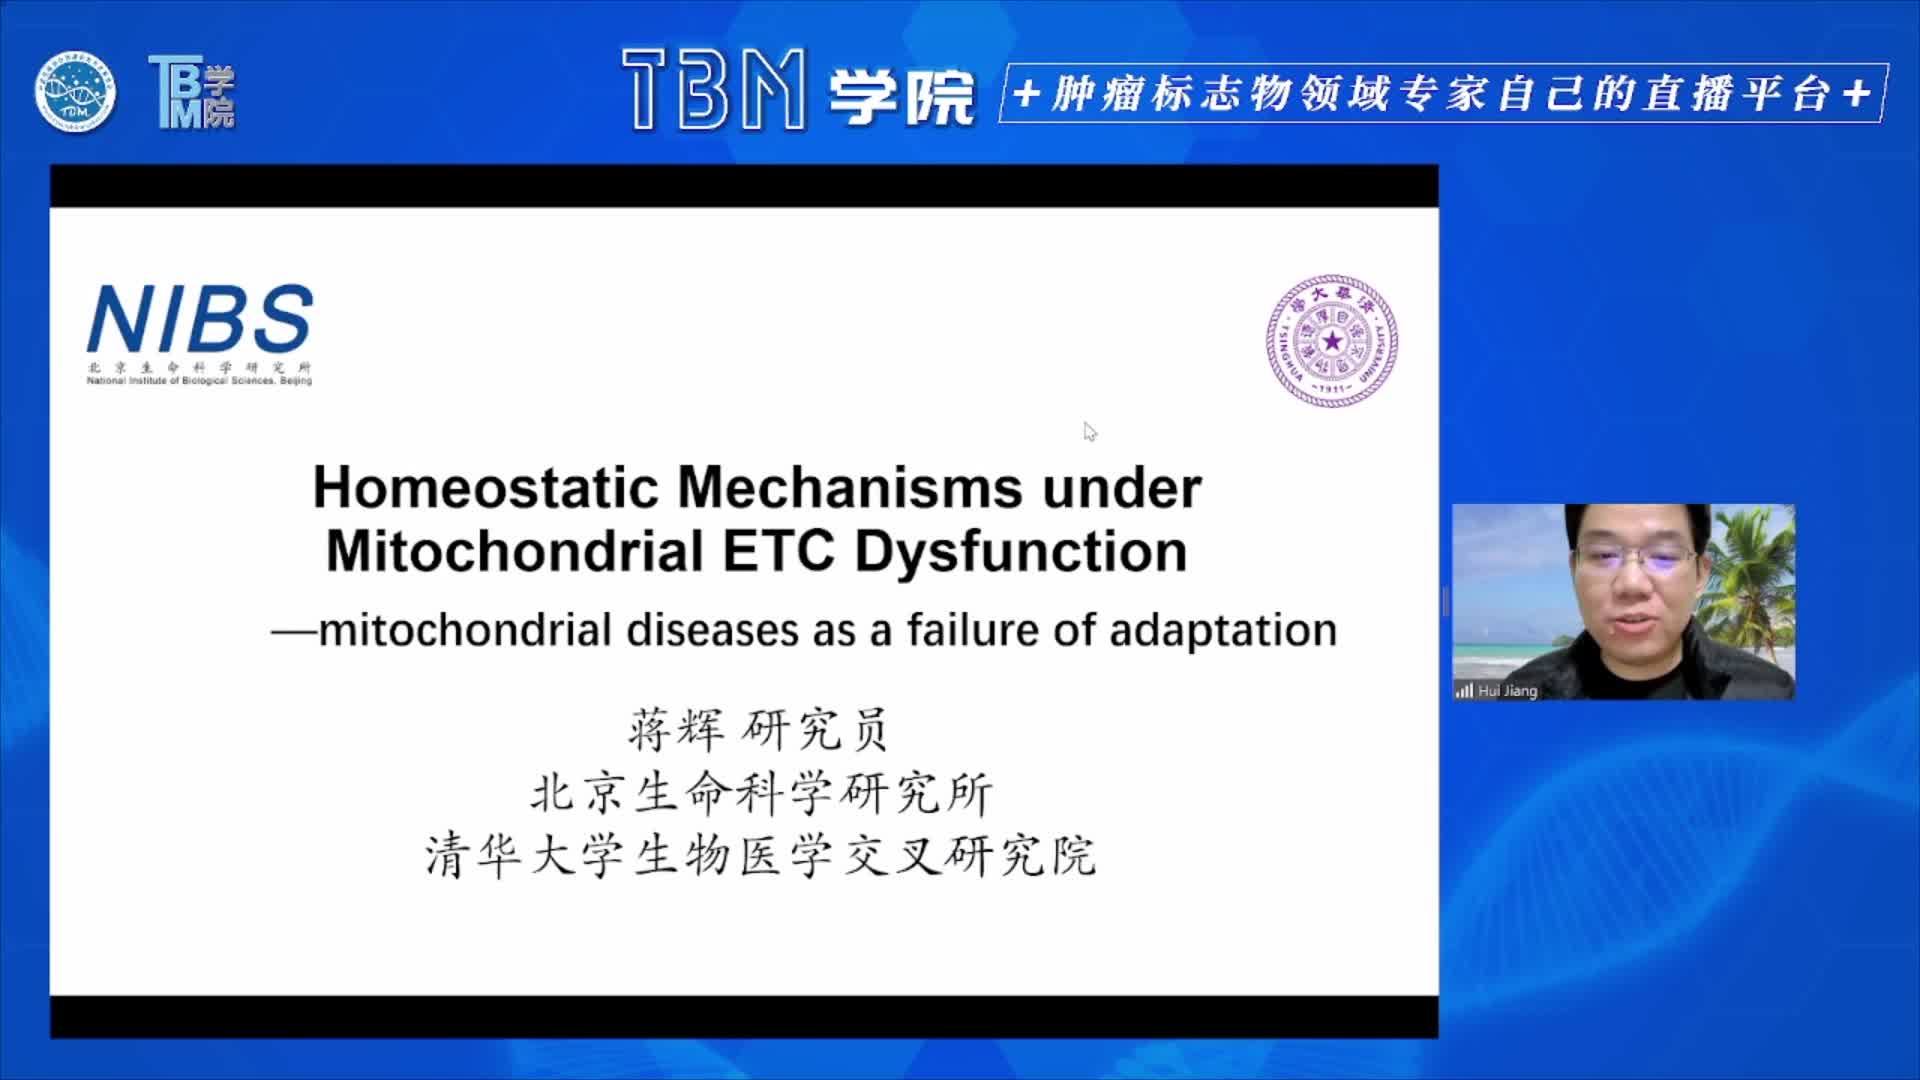 Homeostatic mechanisms under mitochondrial ETC dysfunction